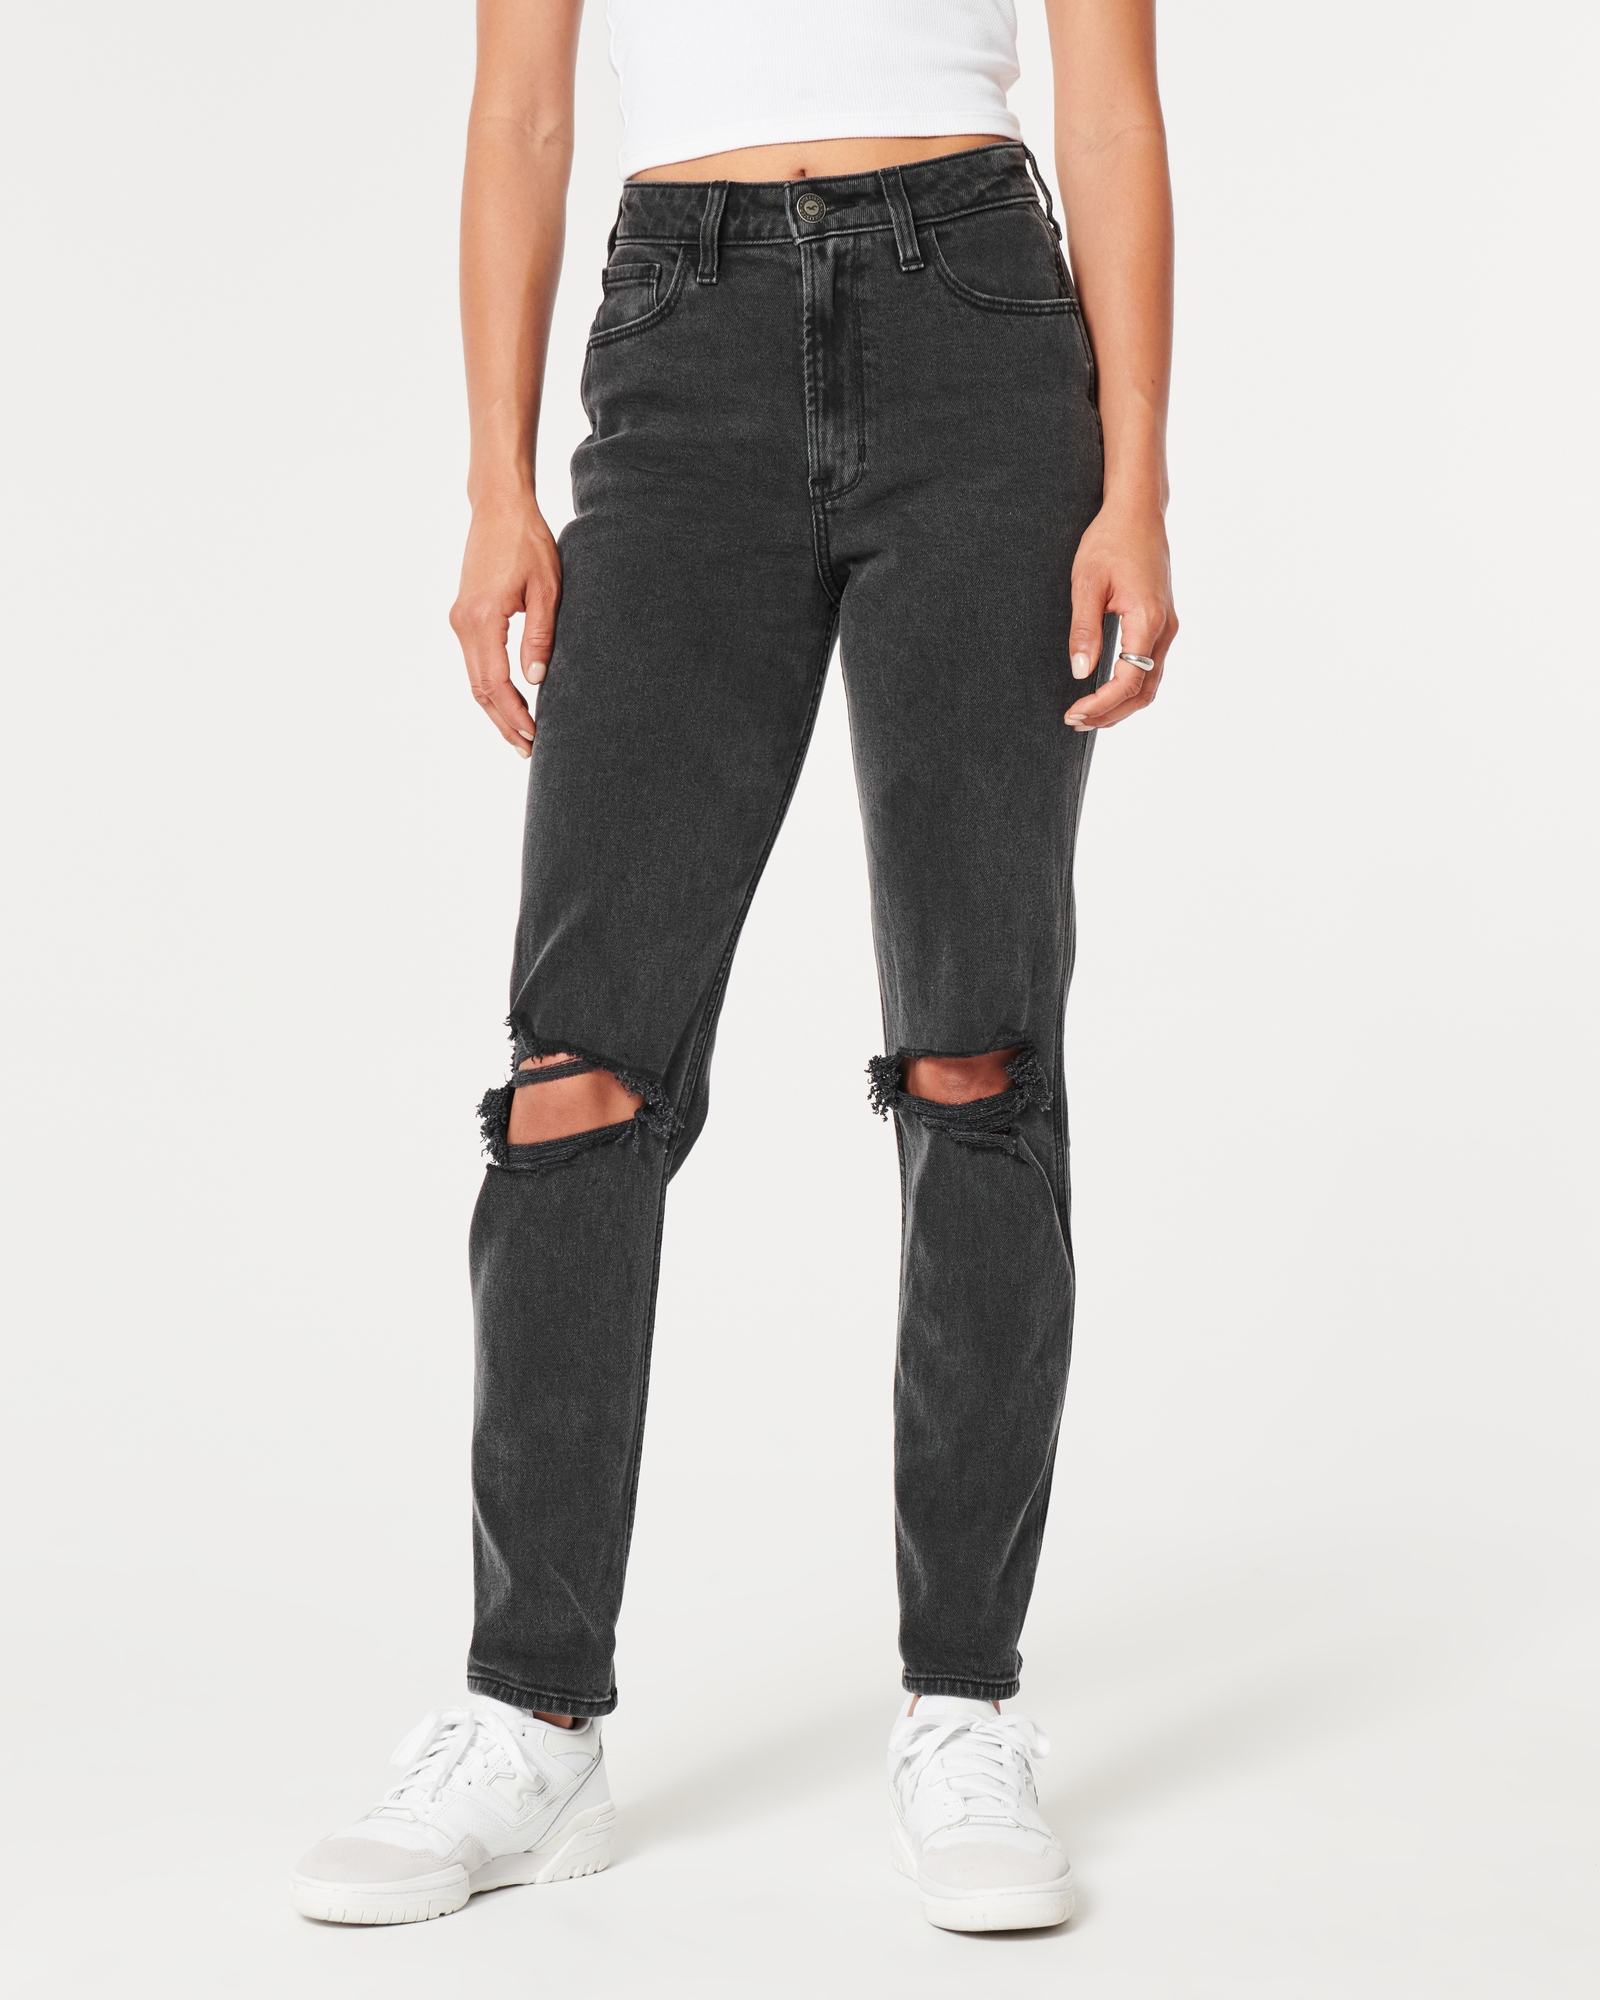 Hollister Curvy Ultra High-Rise Ripped Mom Jeans, Grunge, 0 Short